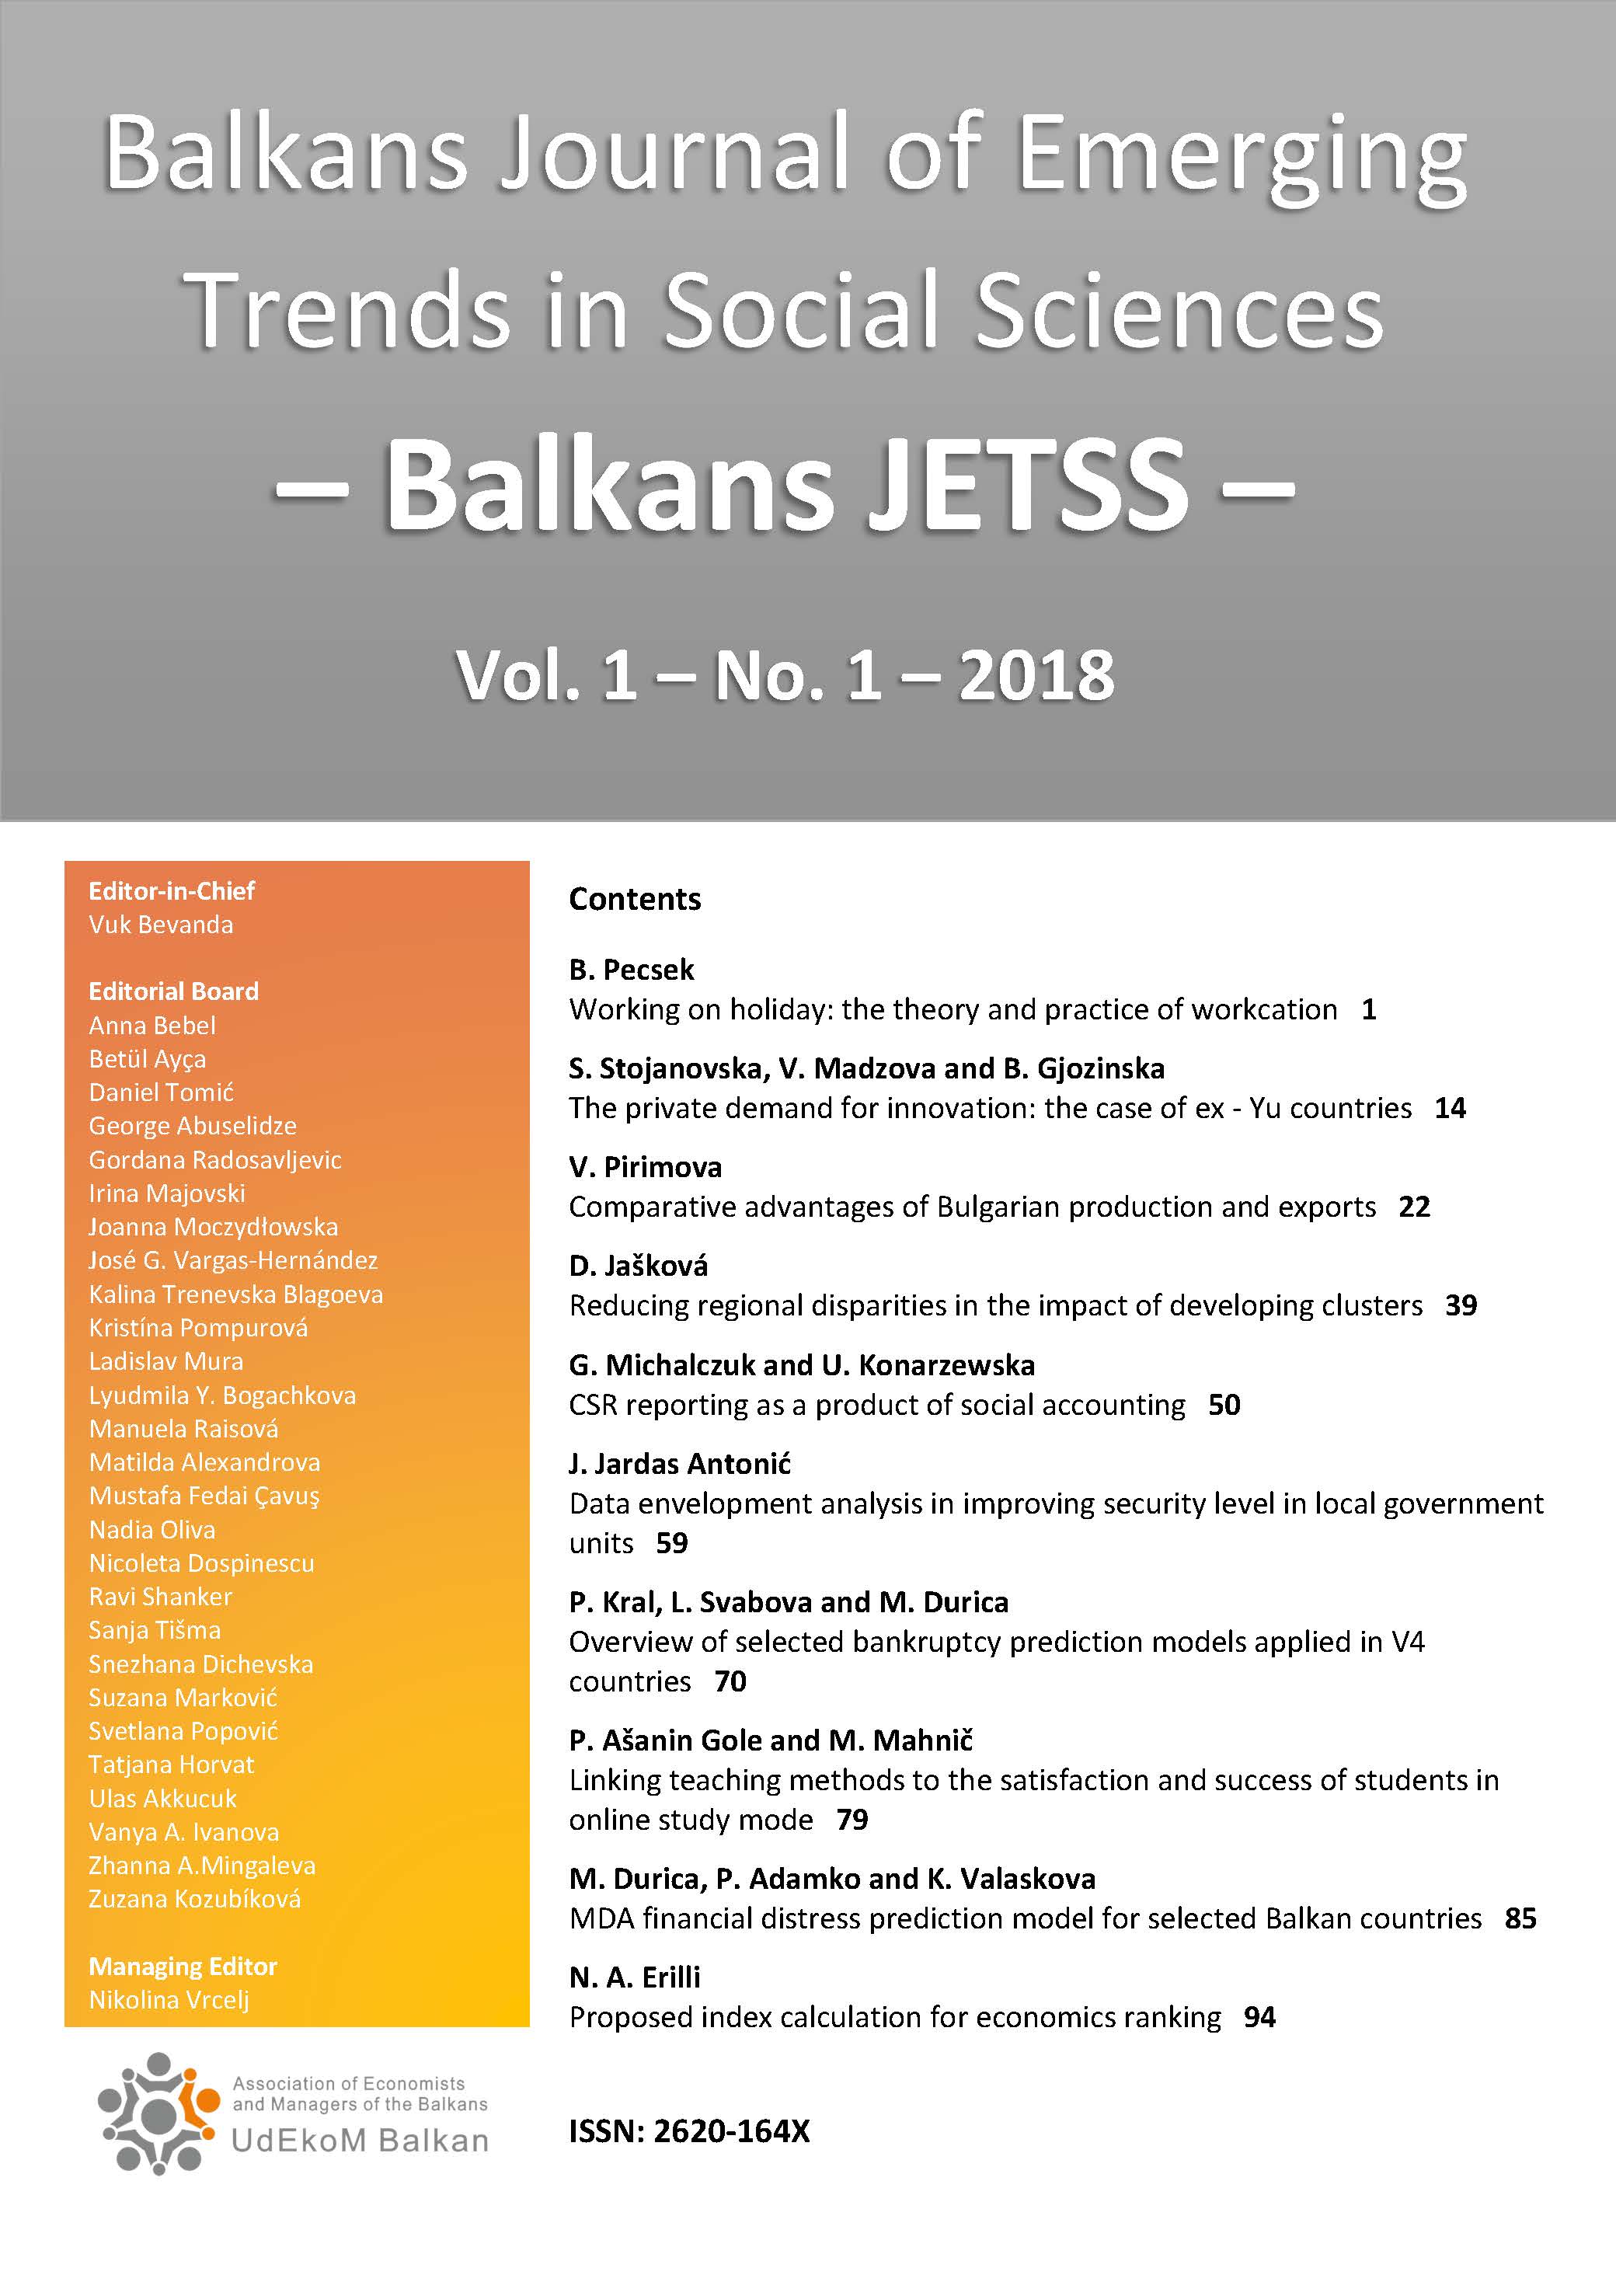 OVERVIEW OF SELECTED BANKRUPTCY PREDICTION MODELS APPLIED IN V4 COUNTRIES